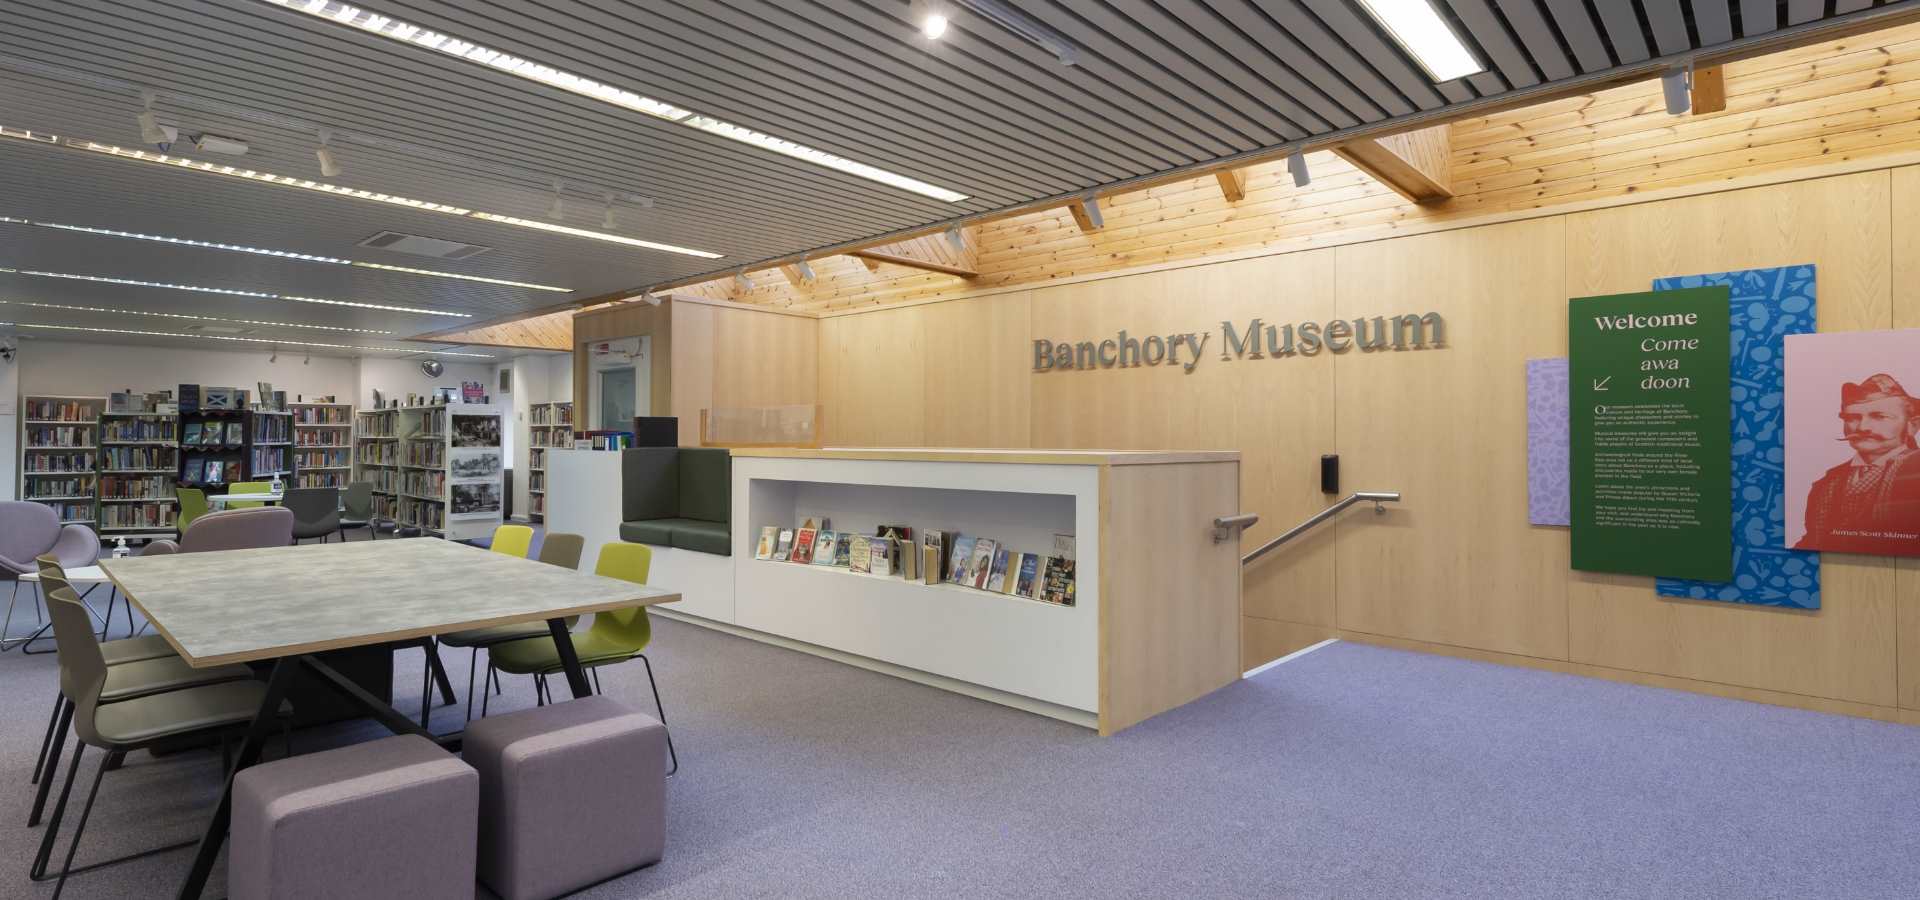 The refurbished Banchory Museum entrance inside the library